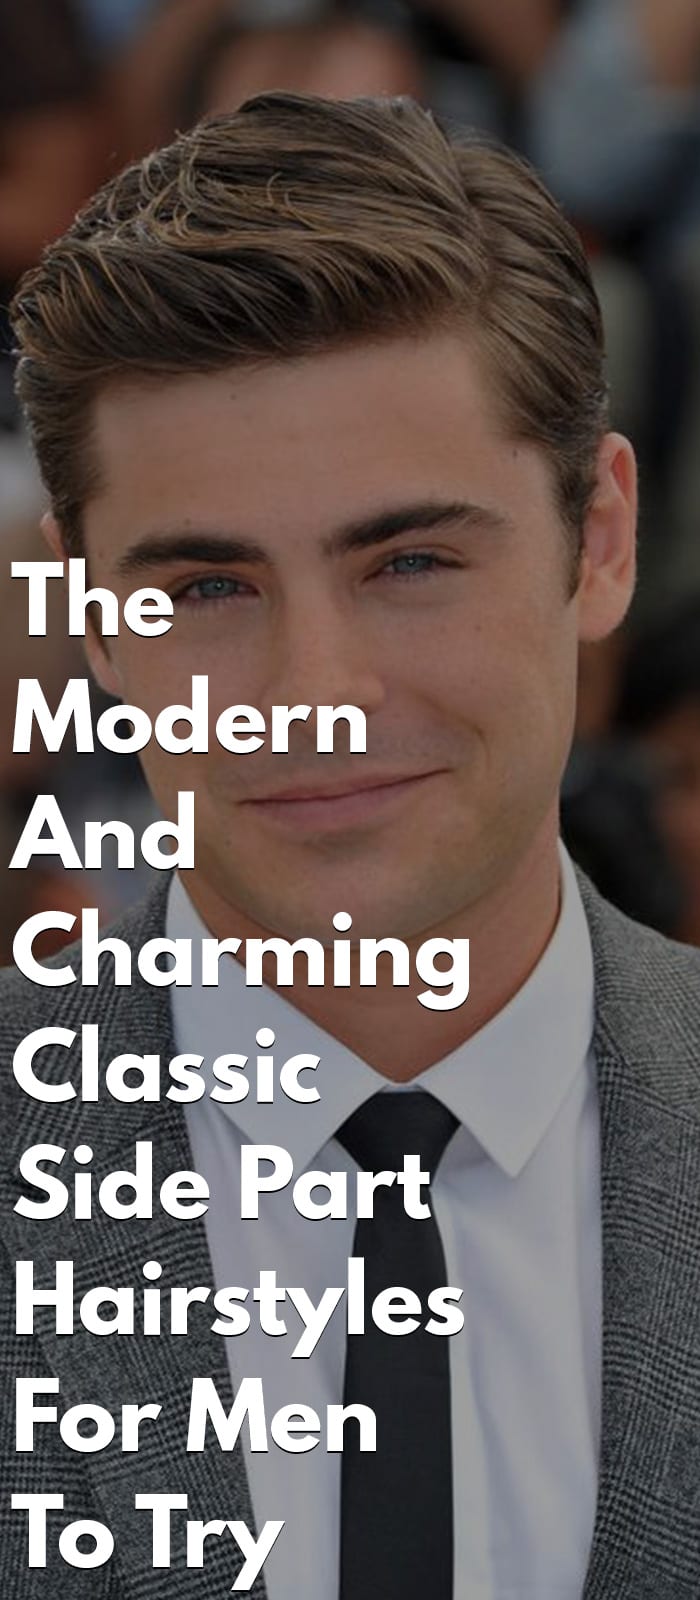 Classic Side Part Hairstyles For Men To Try